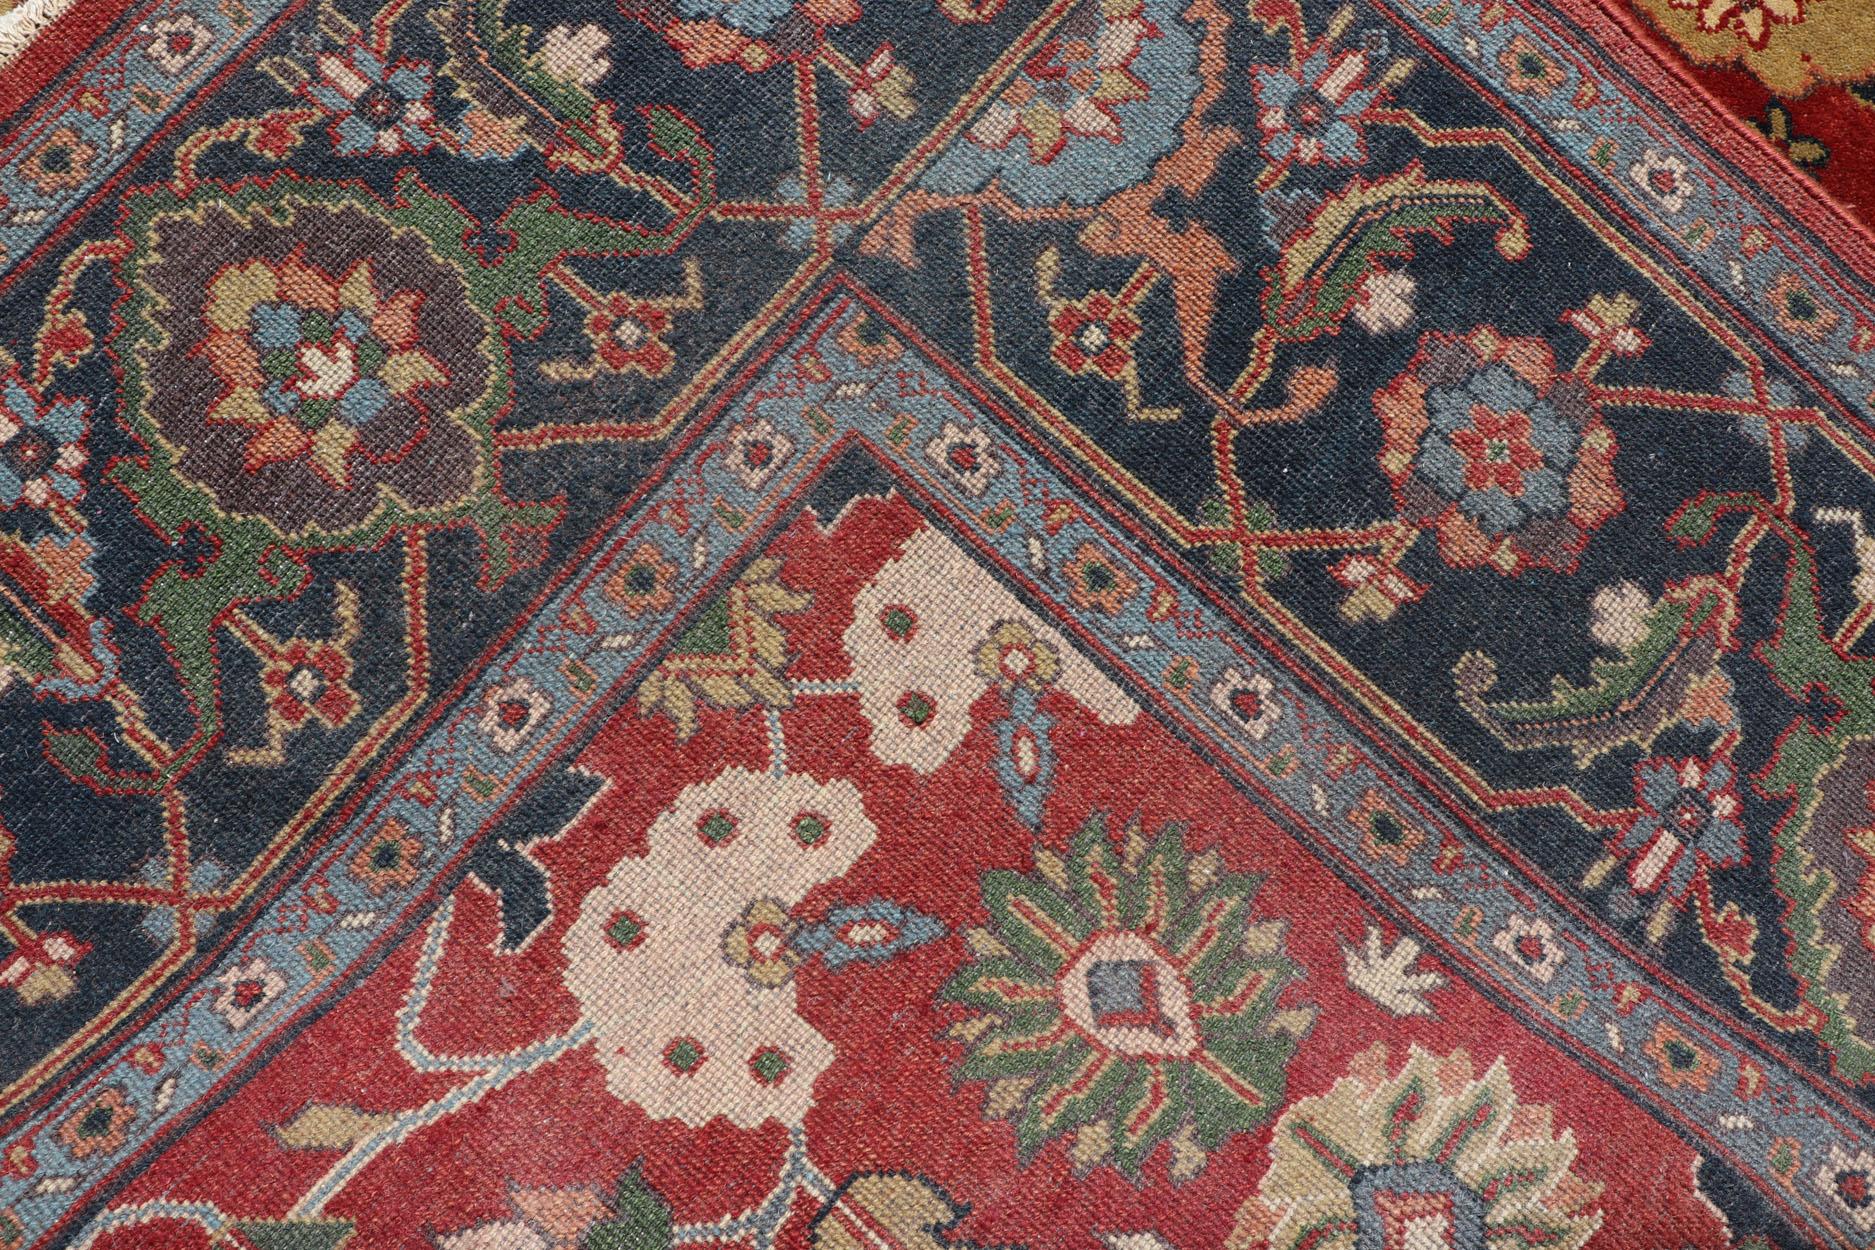 Reproduction Sultanabad-Mahal All-over Floral Hand-Knotted Carpet  10